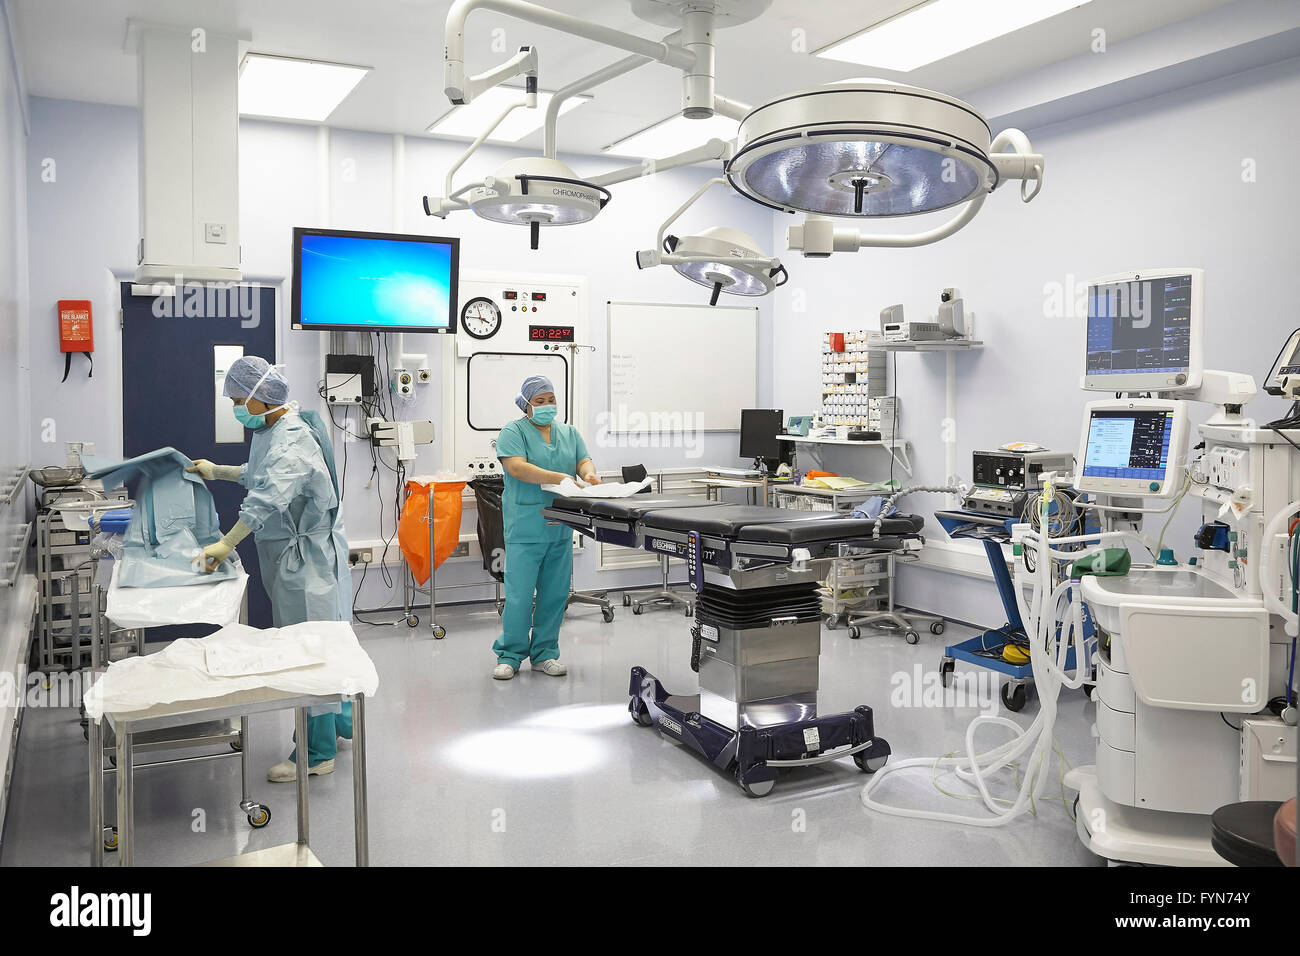 Preparing for surgery in an operating theatre in a hospital in the UK. Stock Photo